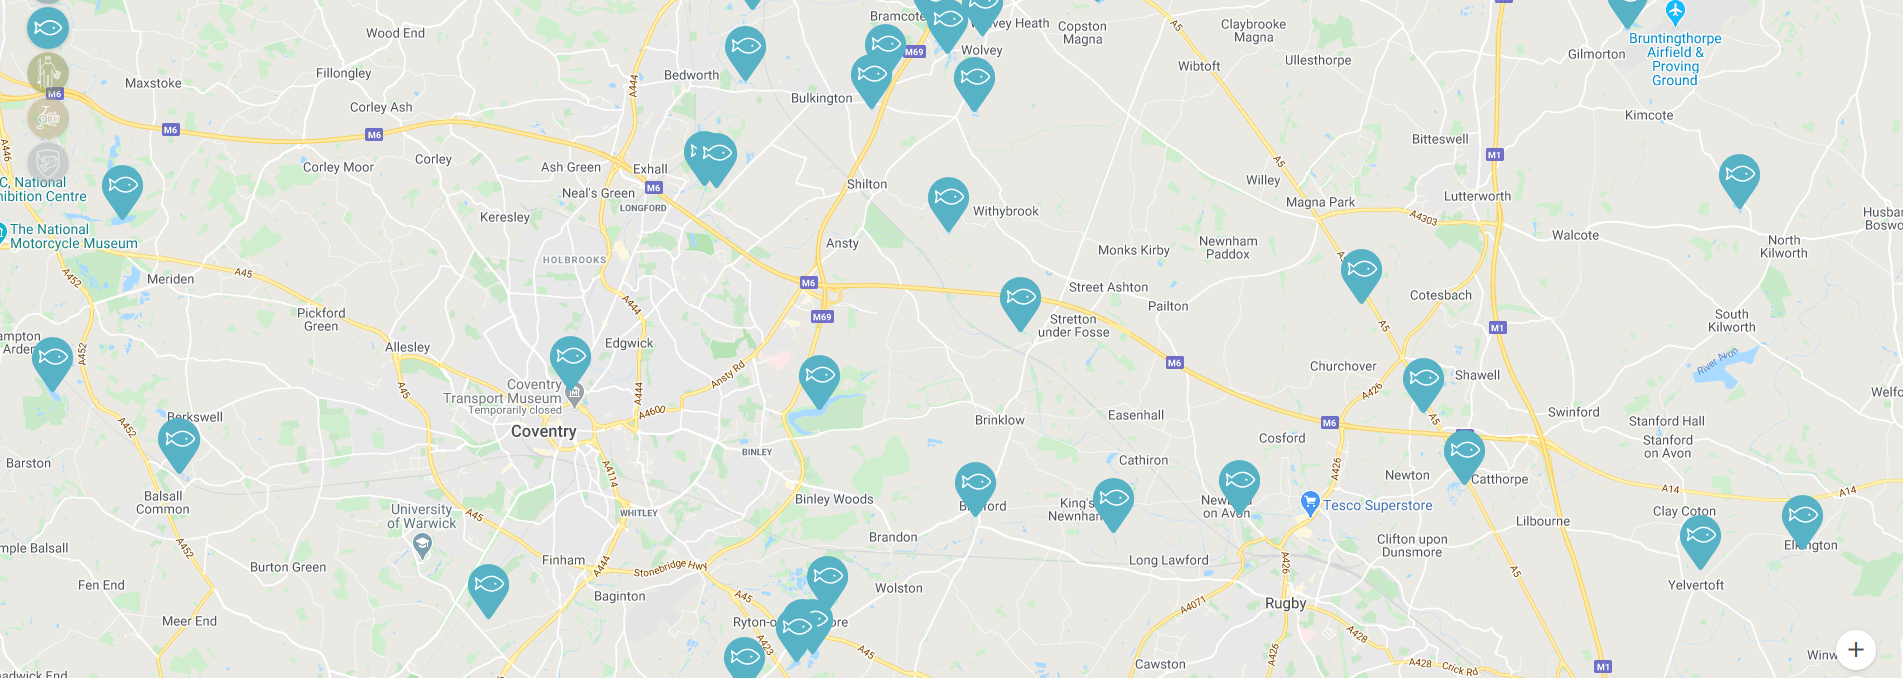 Get Fishing | Angling Trust Map of Events